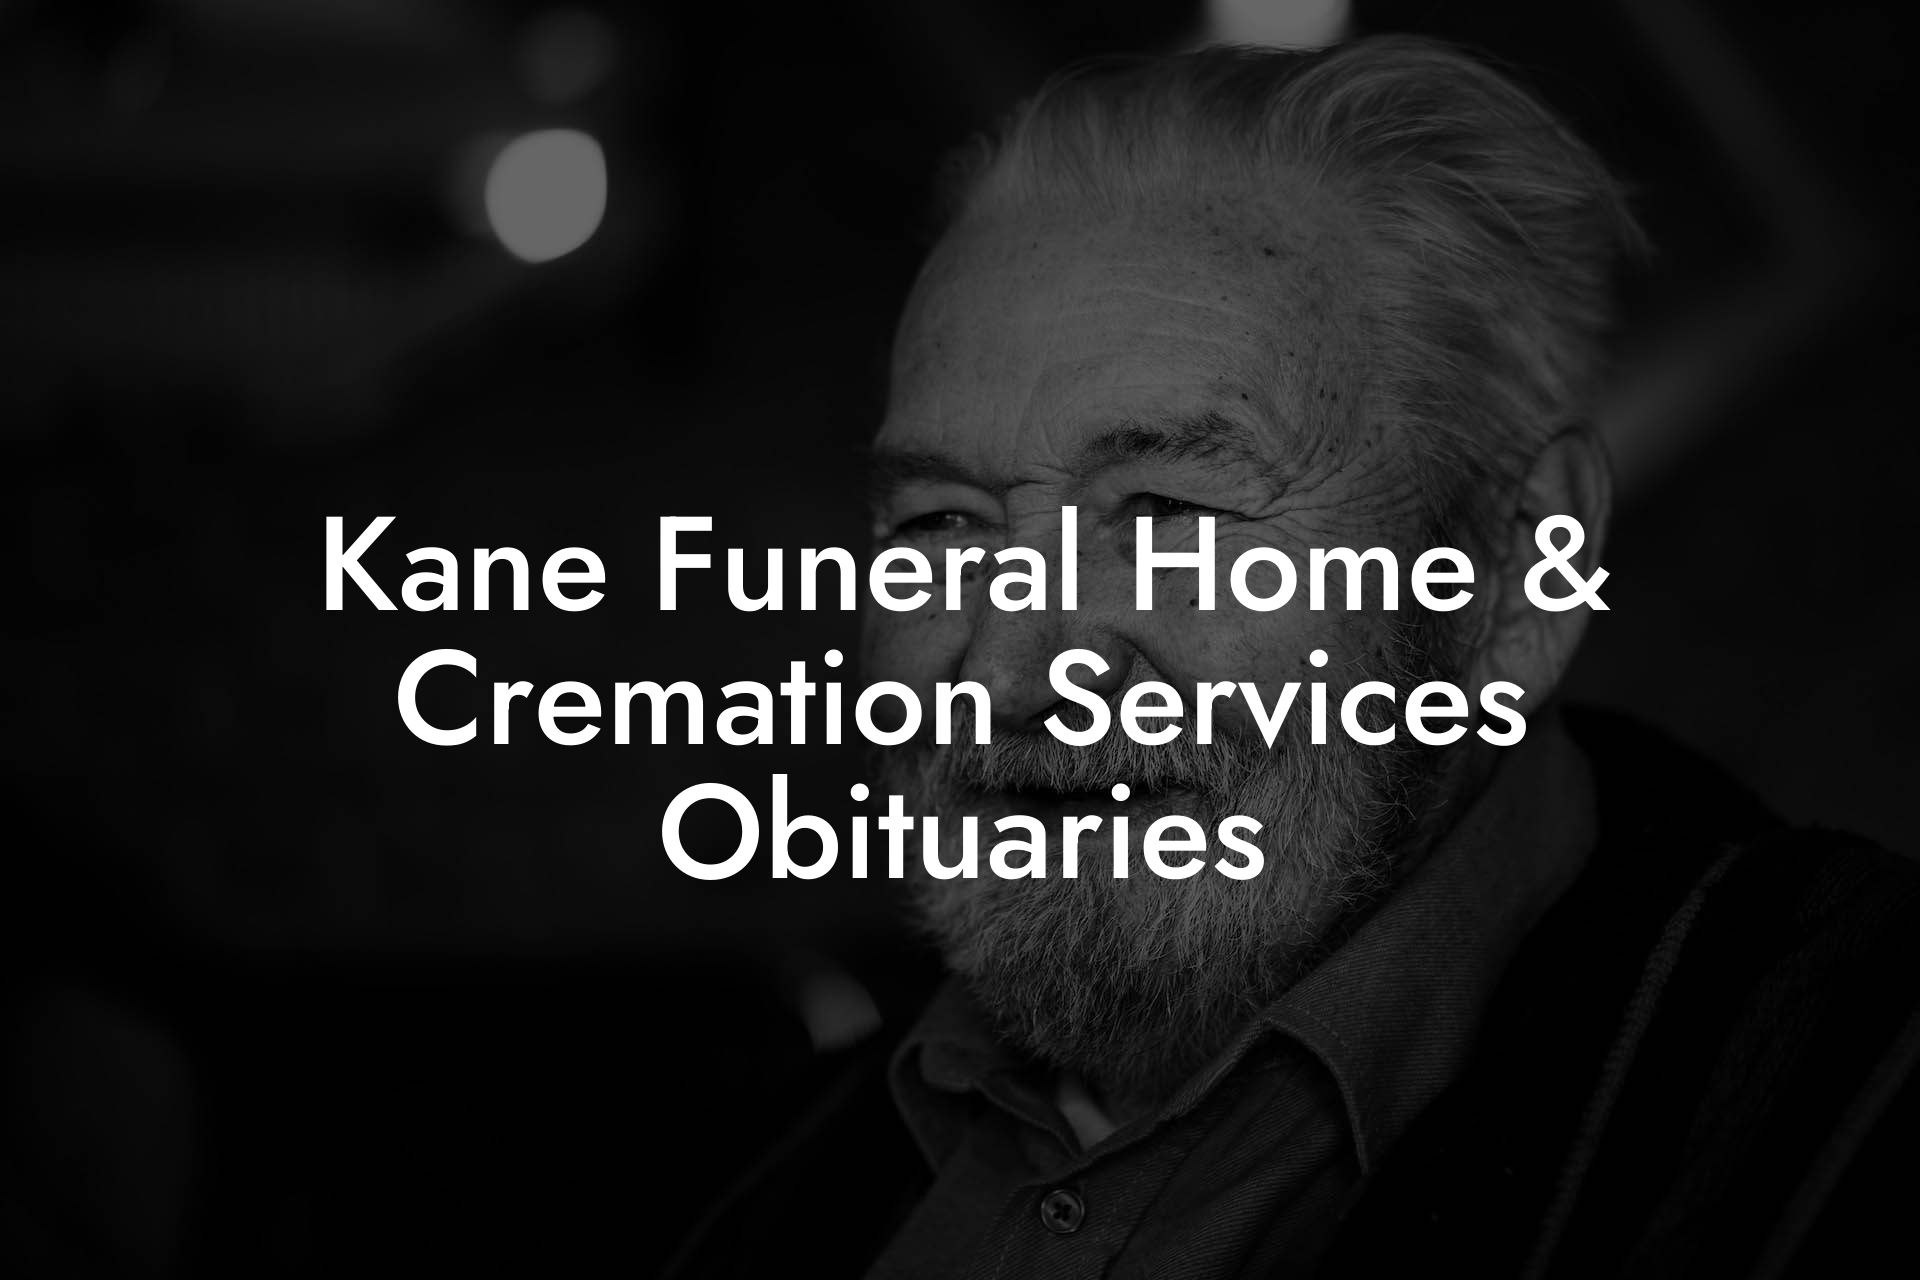 Kane Funeral Home & Cremation Services Obituaries - Eulogy Assistant